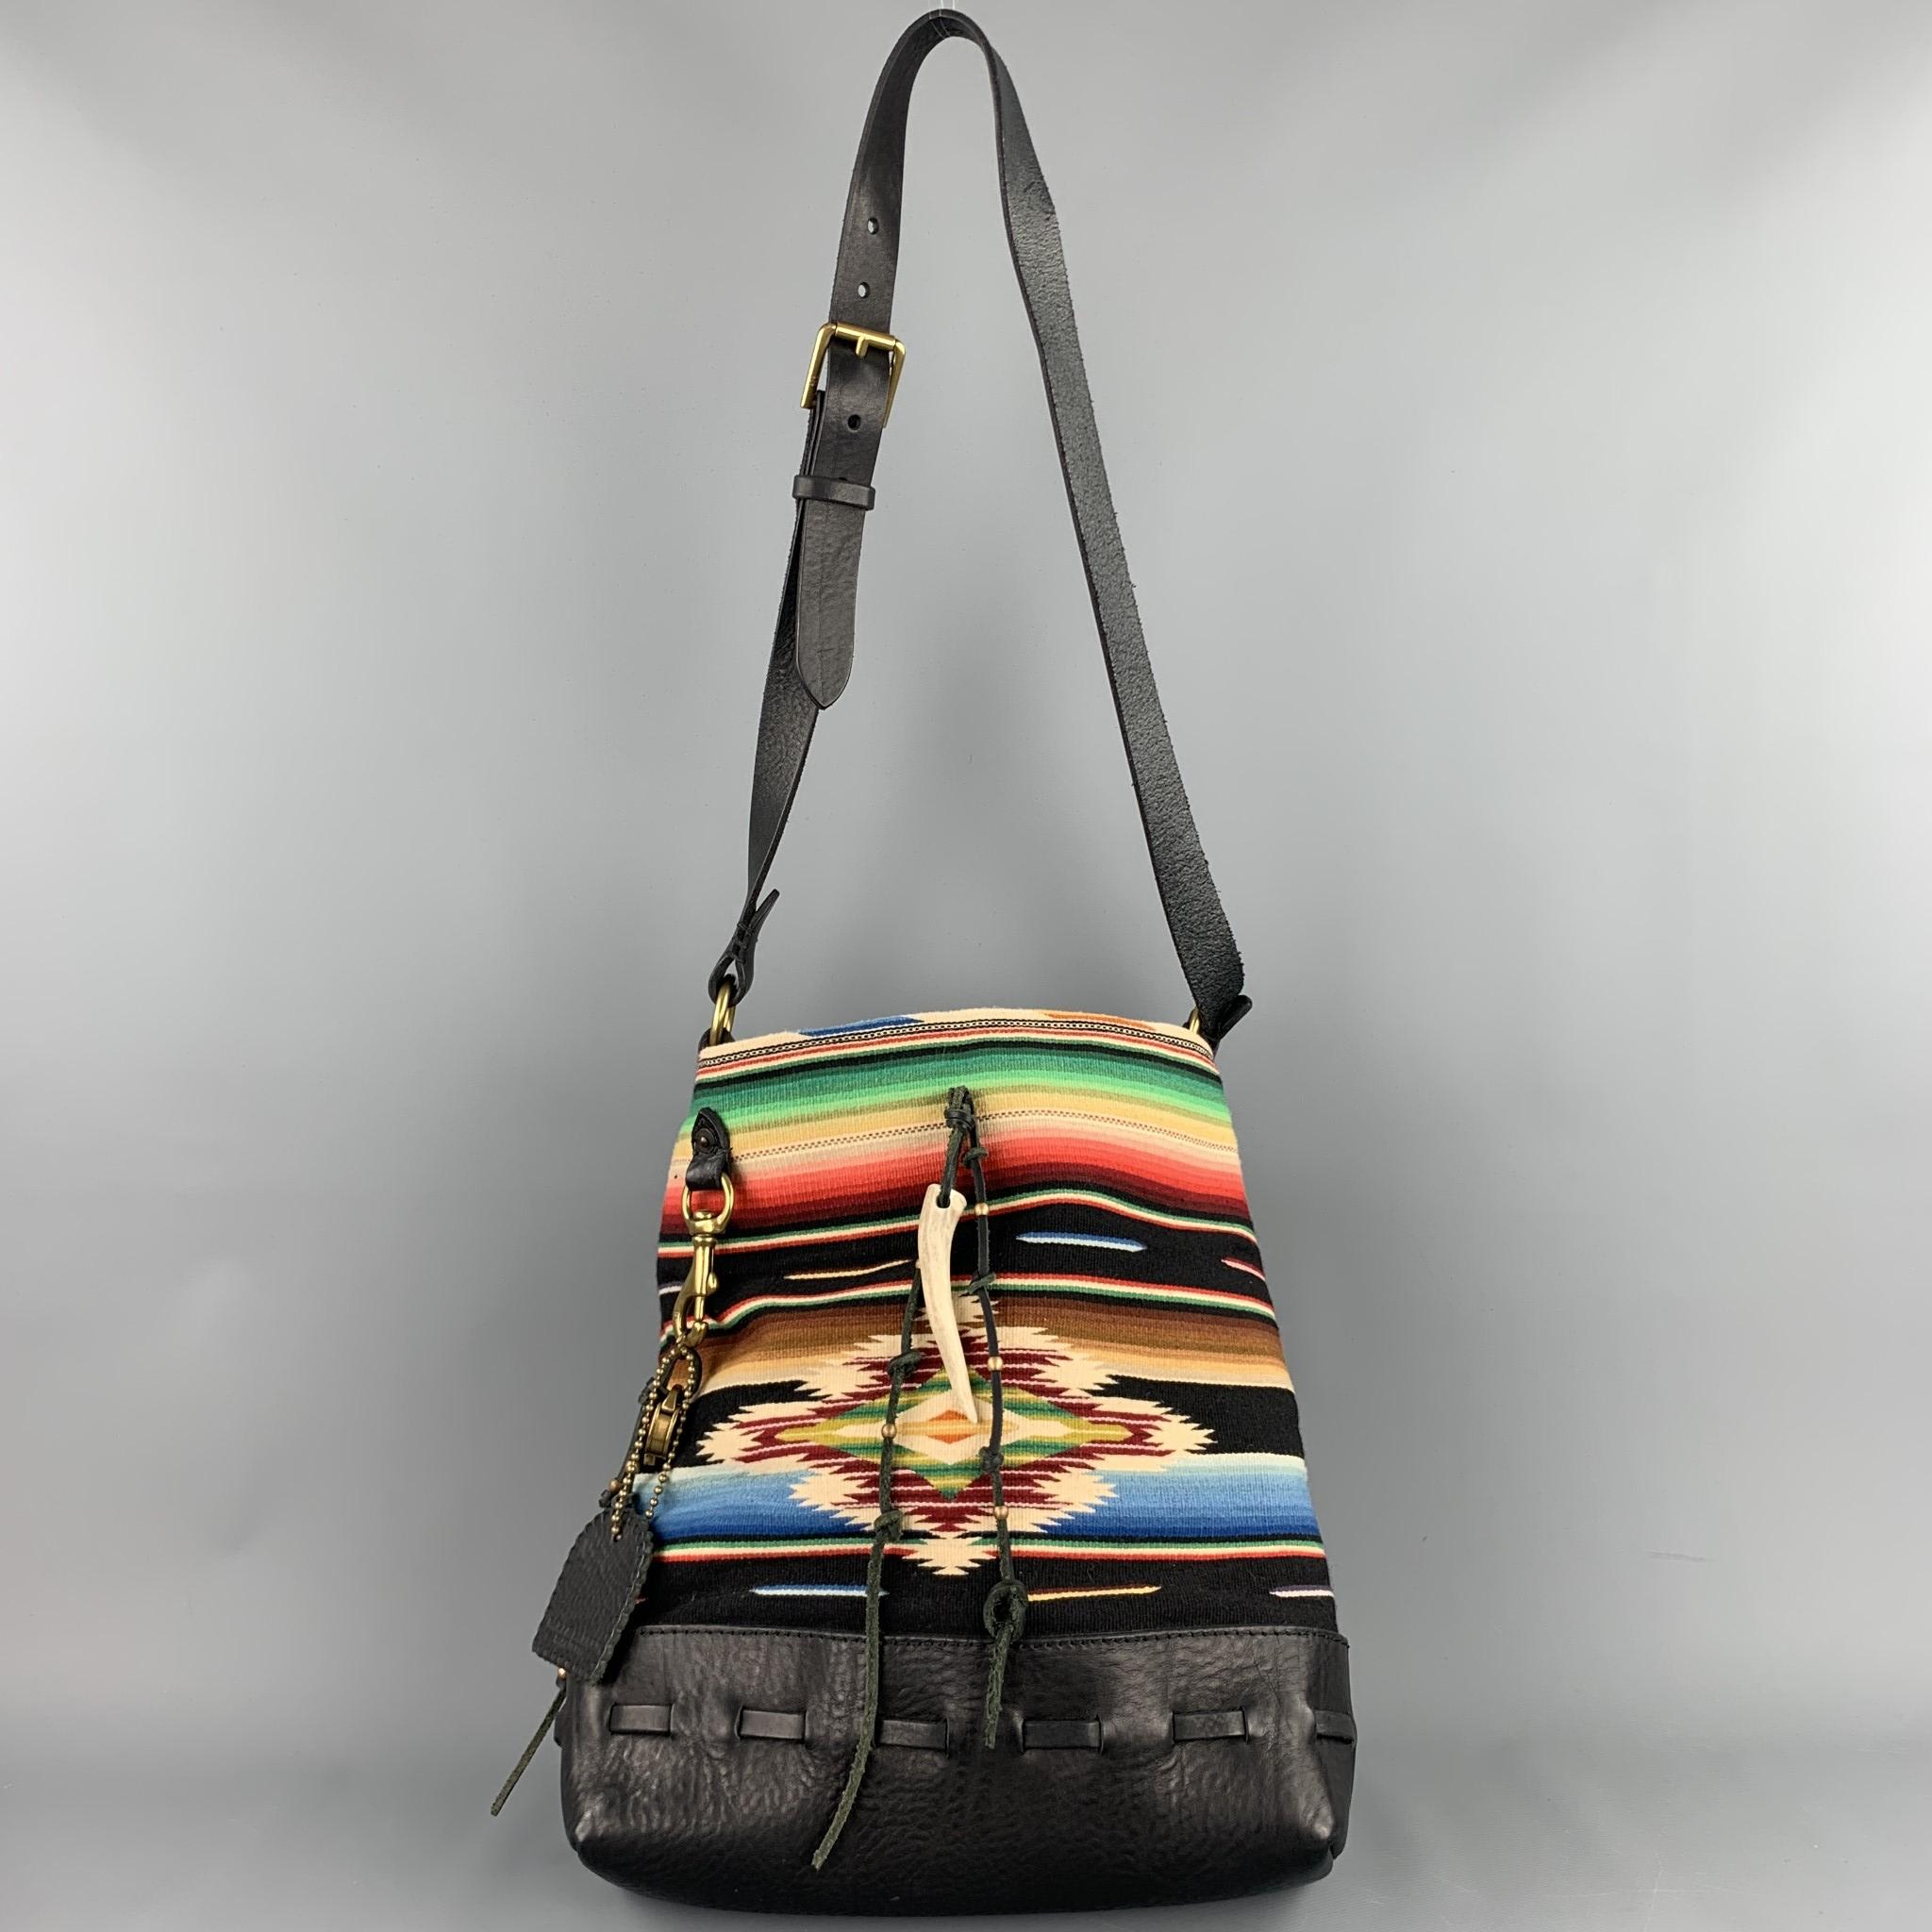 RALPH LAUREN shoulder bag comes in a multi-color navajo print fabric with a leather trim featuring hanging leather tassel details, tusk charm, signature lock & key, open top, inner pockets, and a adjustable shoulder strap.

Very Good Pre-Owned